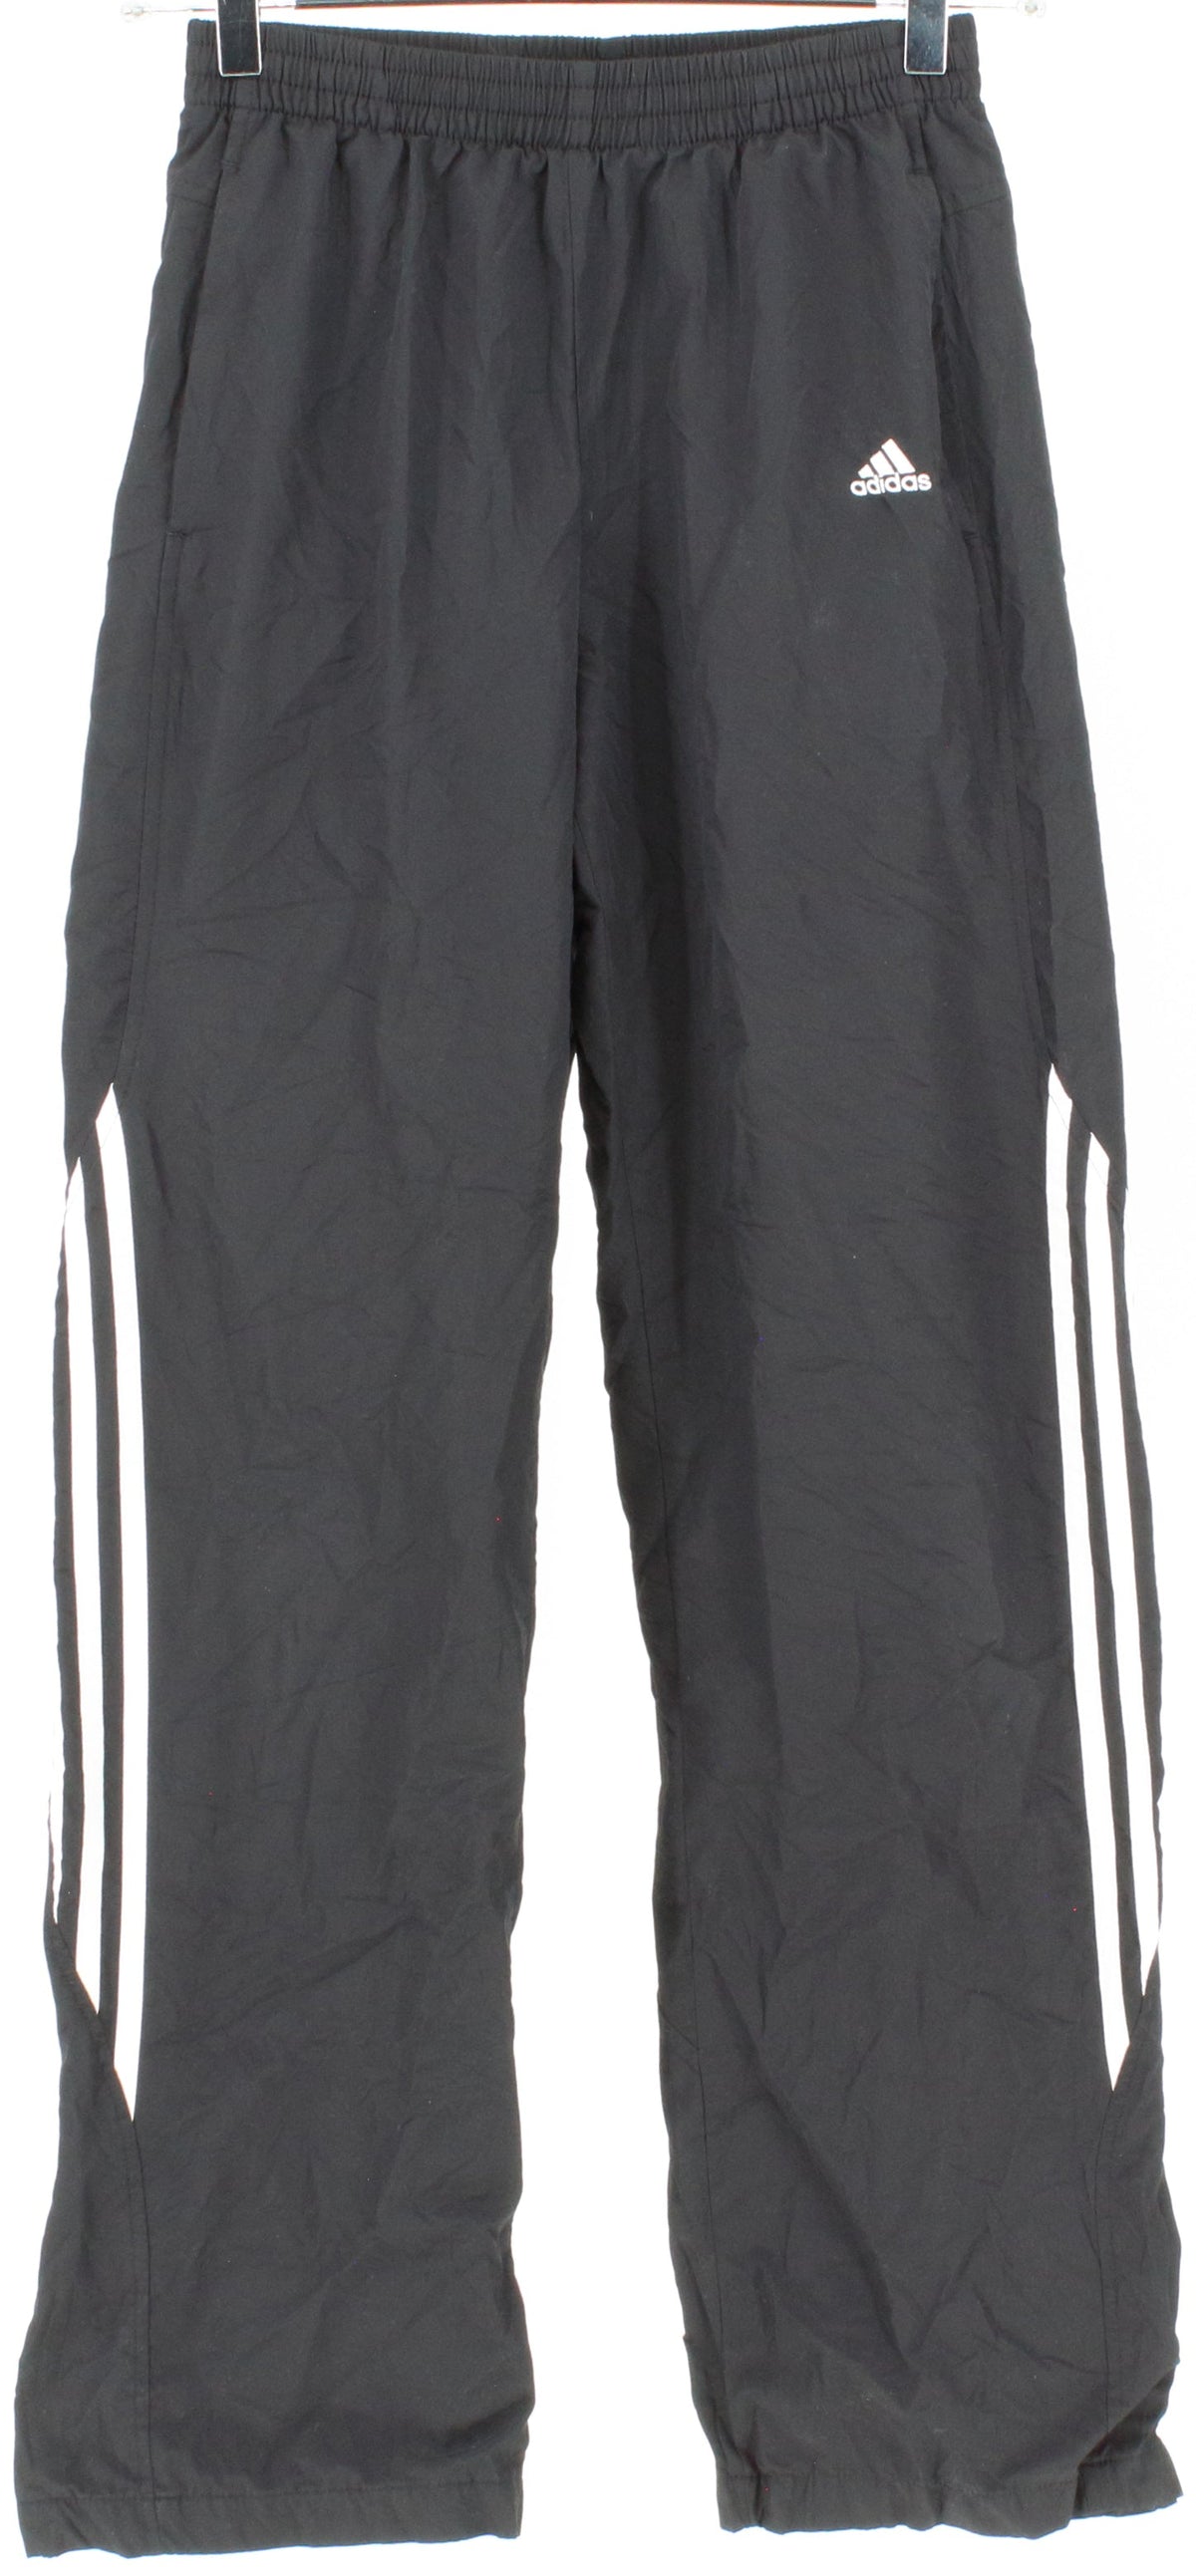 Adidas Black Women's Track Pants With White Side Stripes